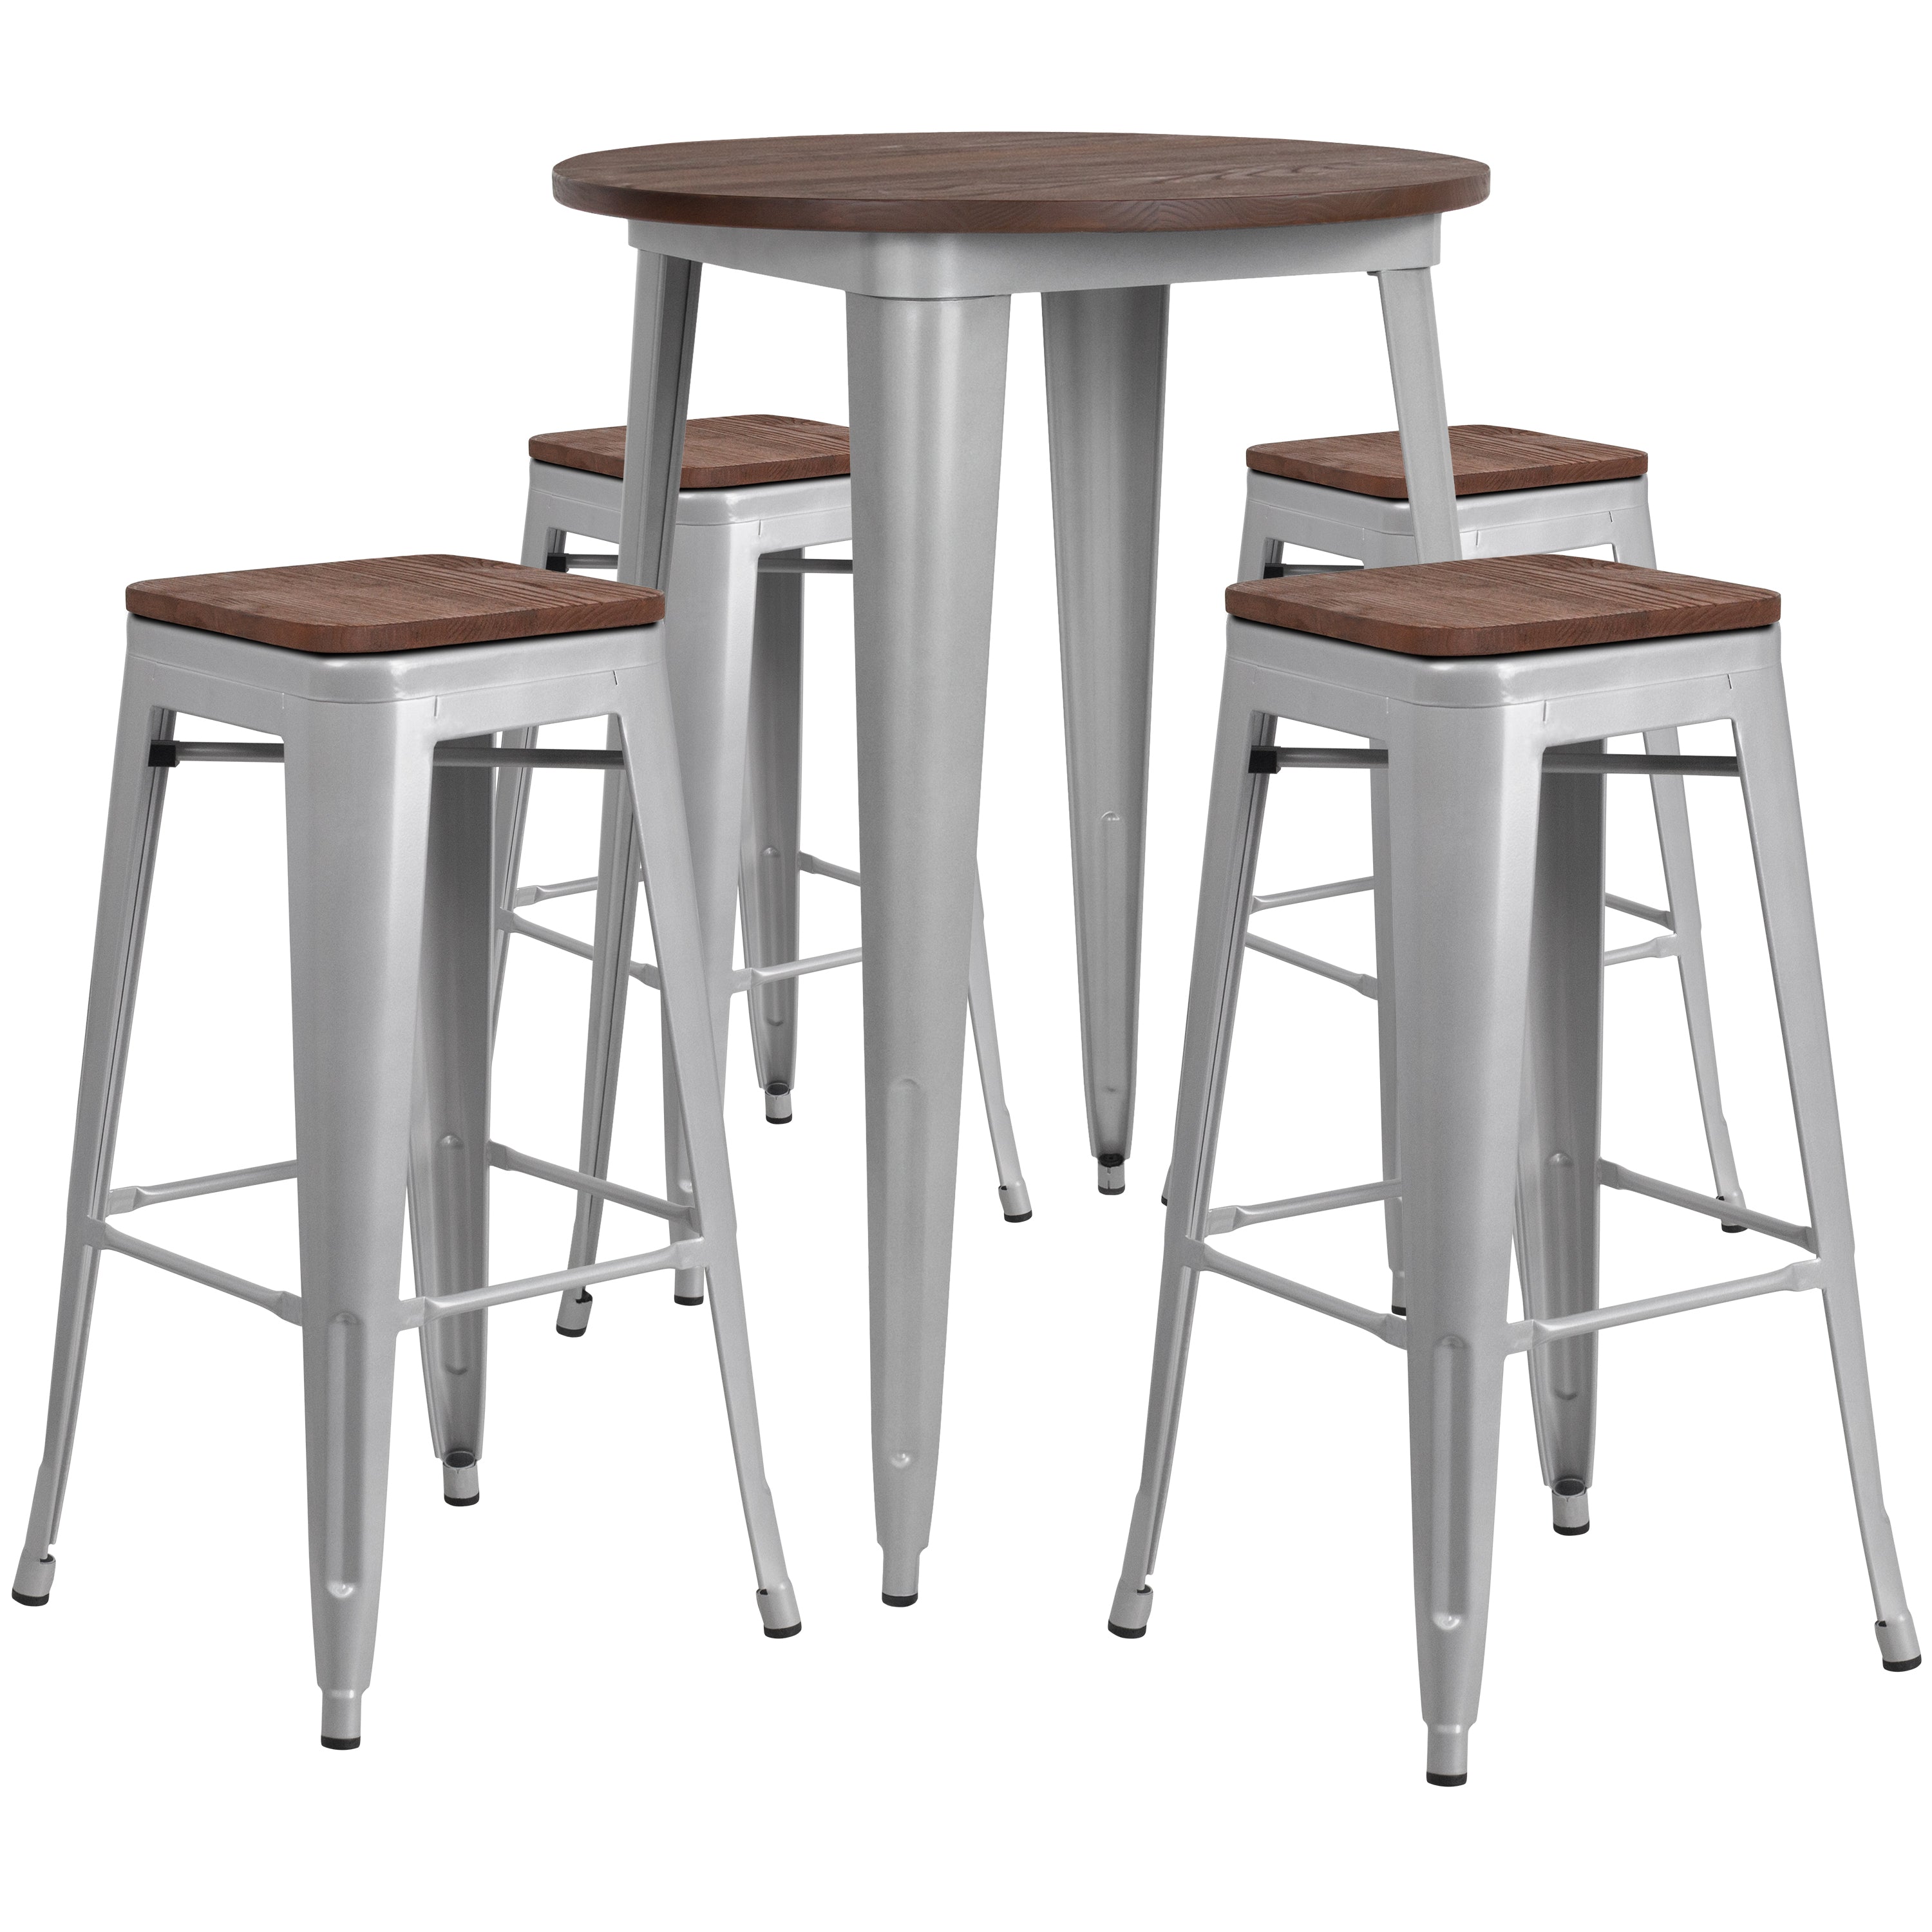 30" Round Metal Bar Table Set with Wood Top and 4 Backless Stools-Metal/ Colorful Bar Table and Stool Set-Flash Furniture-Wall2Wall Furnishings